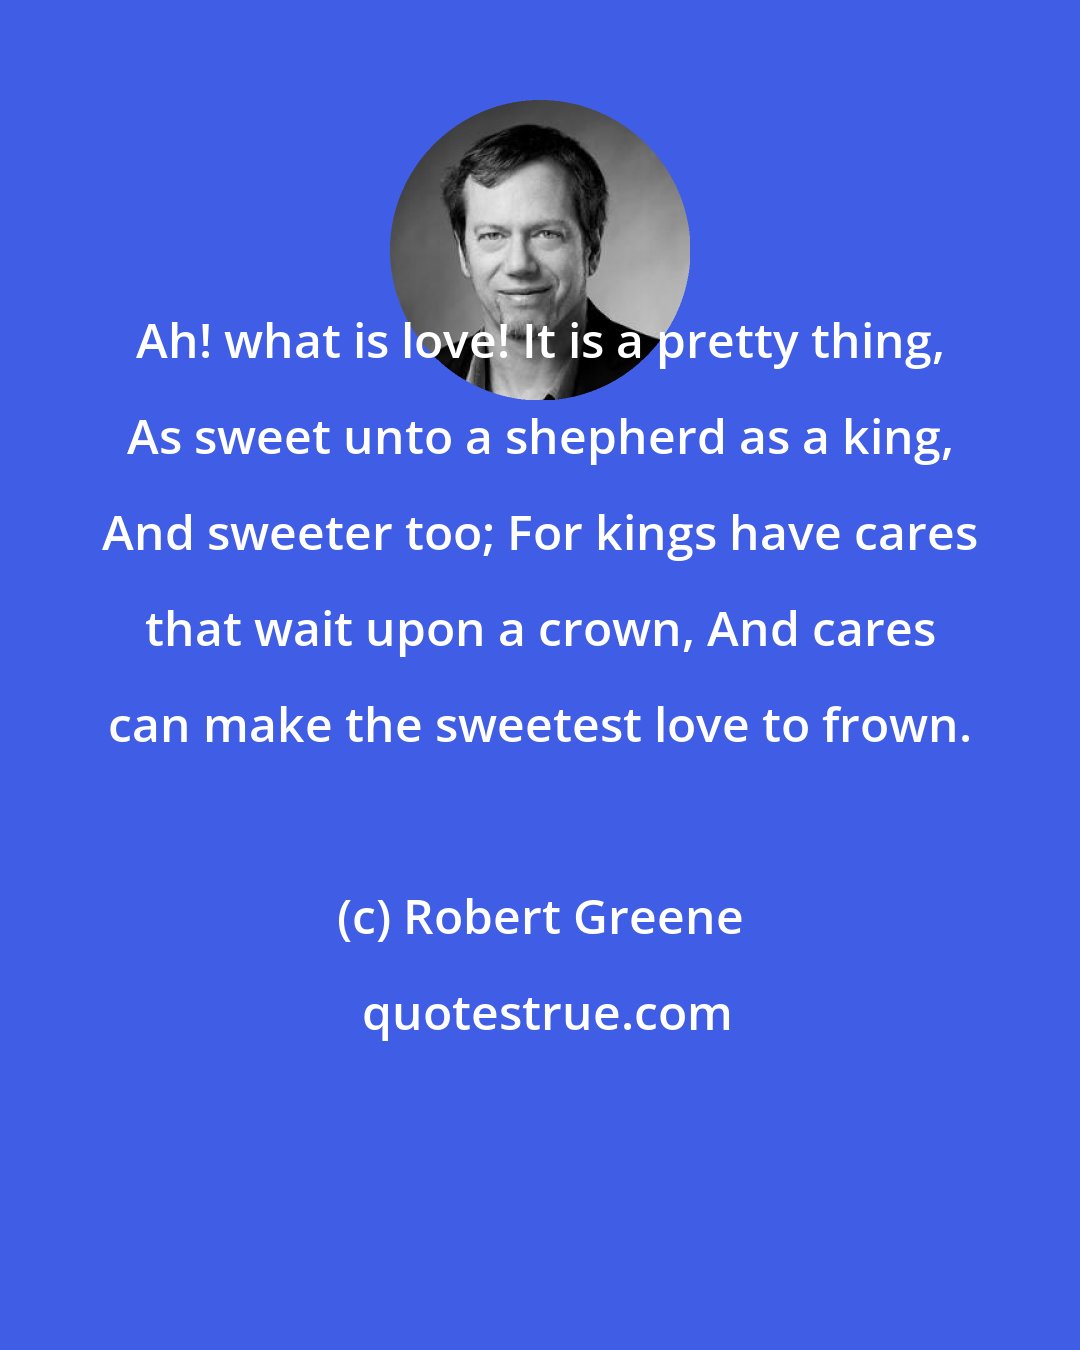 Robert Greene: Ah! what is love! It is a pretty thing, As sweet unto a shepherd as a king, And sweeter too; For kings have cares that wait upon a crown, And cares can make the sweetest love to frown.